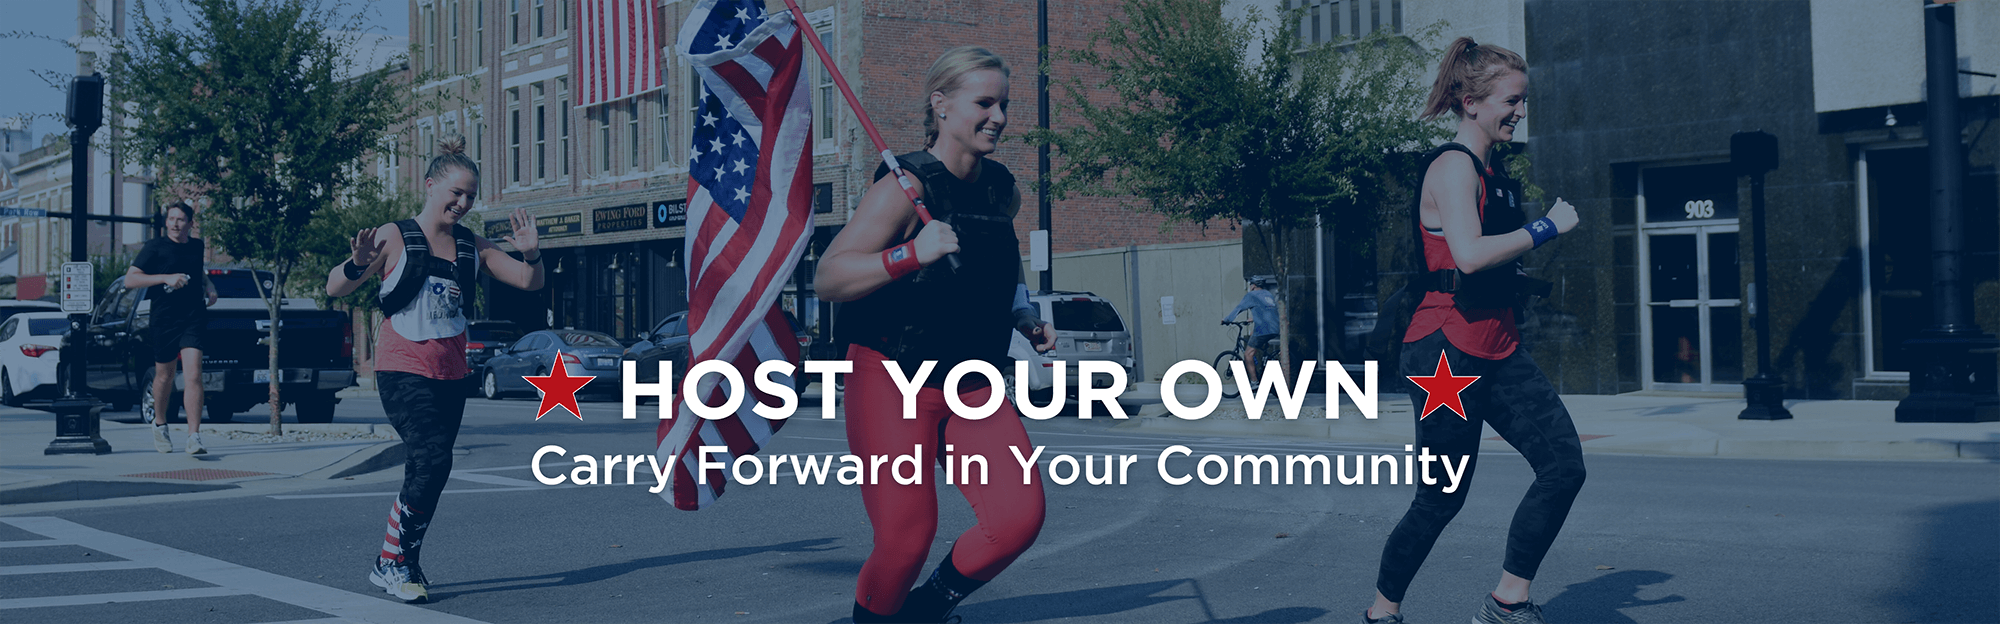 Host Your Own - Carry Forward in Your Community